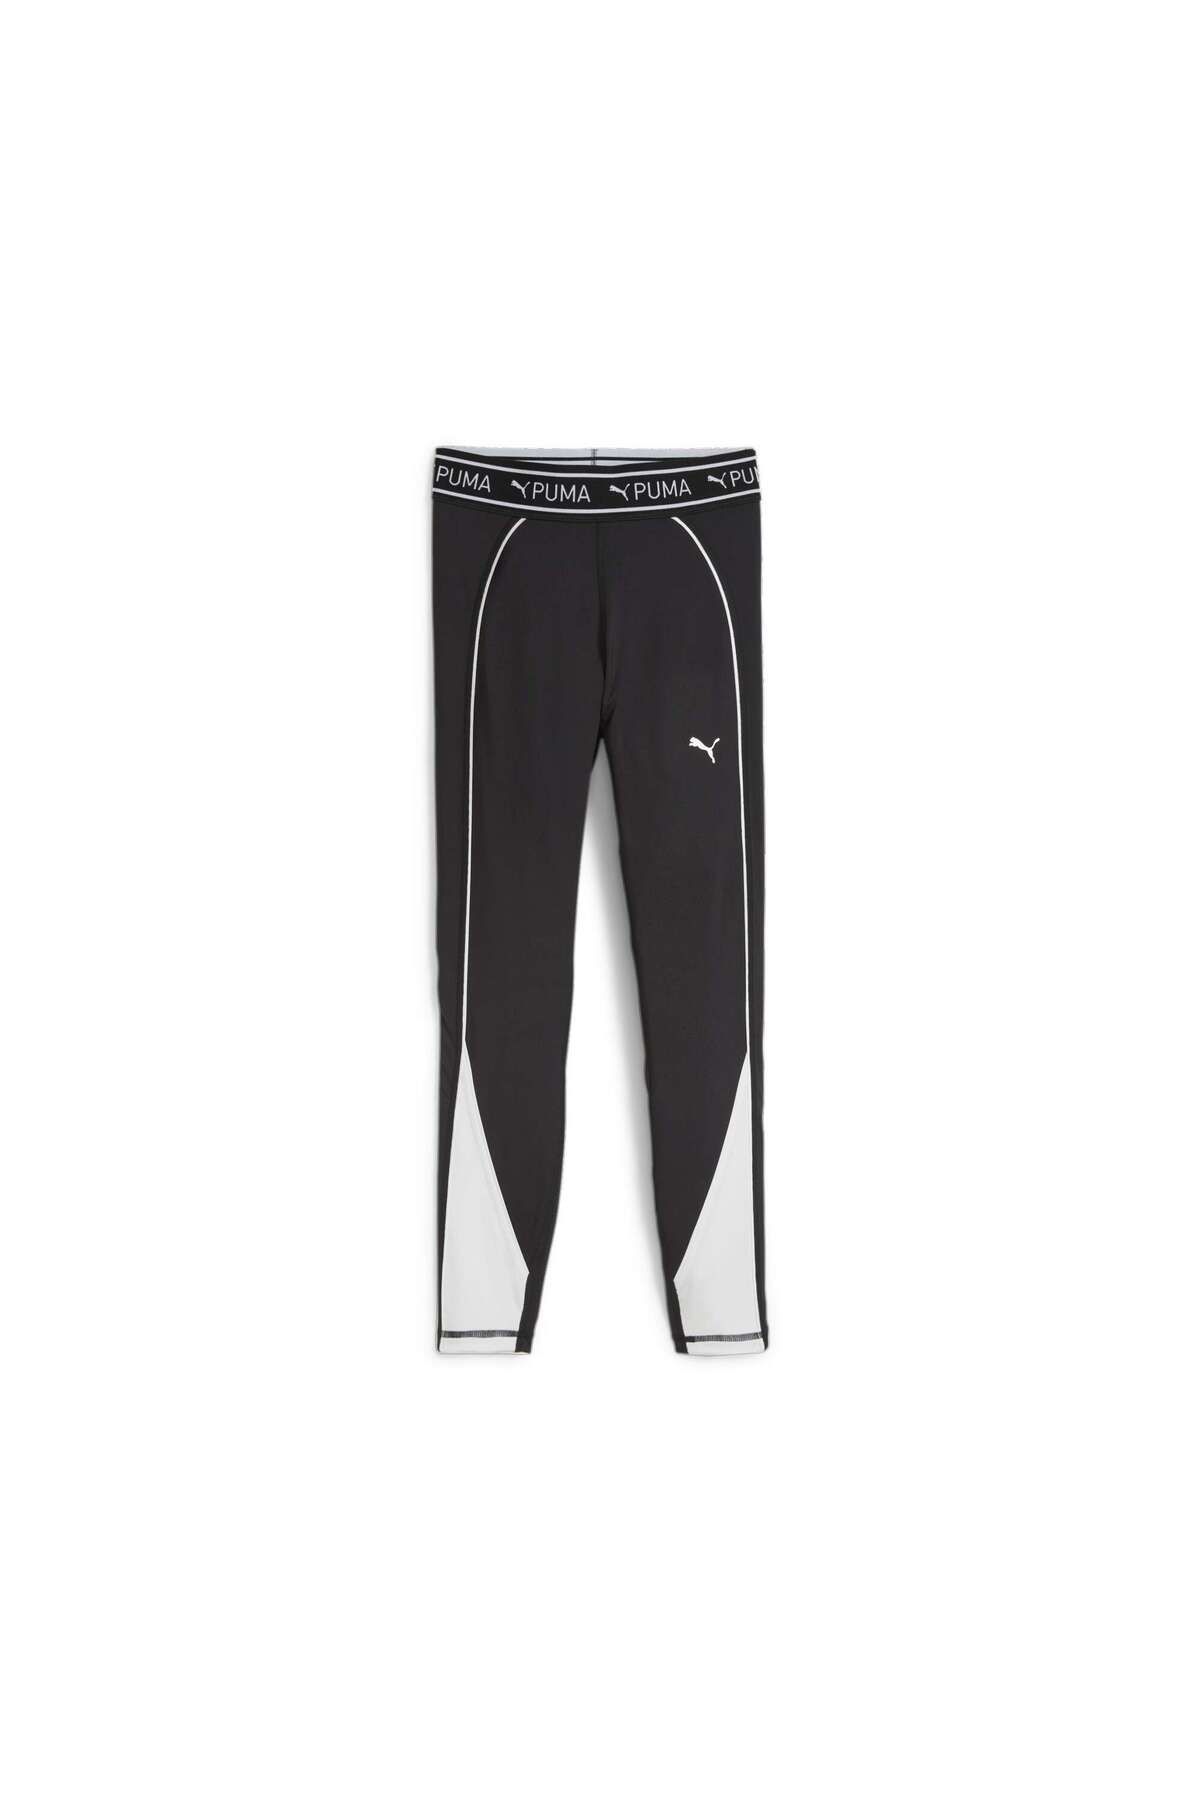 Puma FIT STRONG 7/8 TIGHT